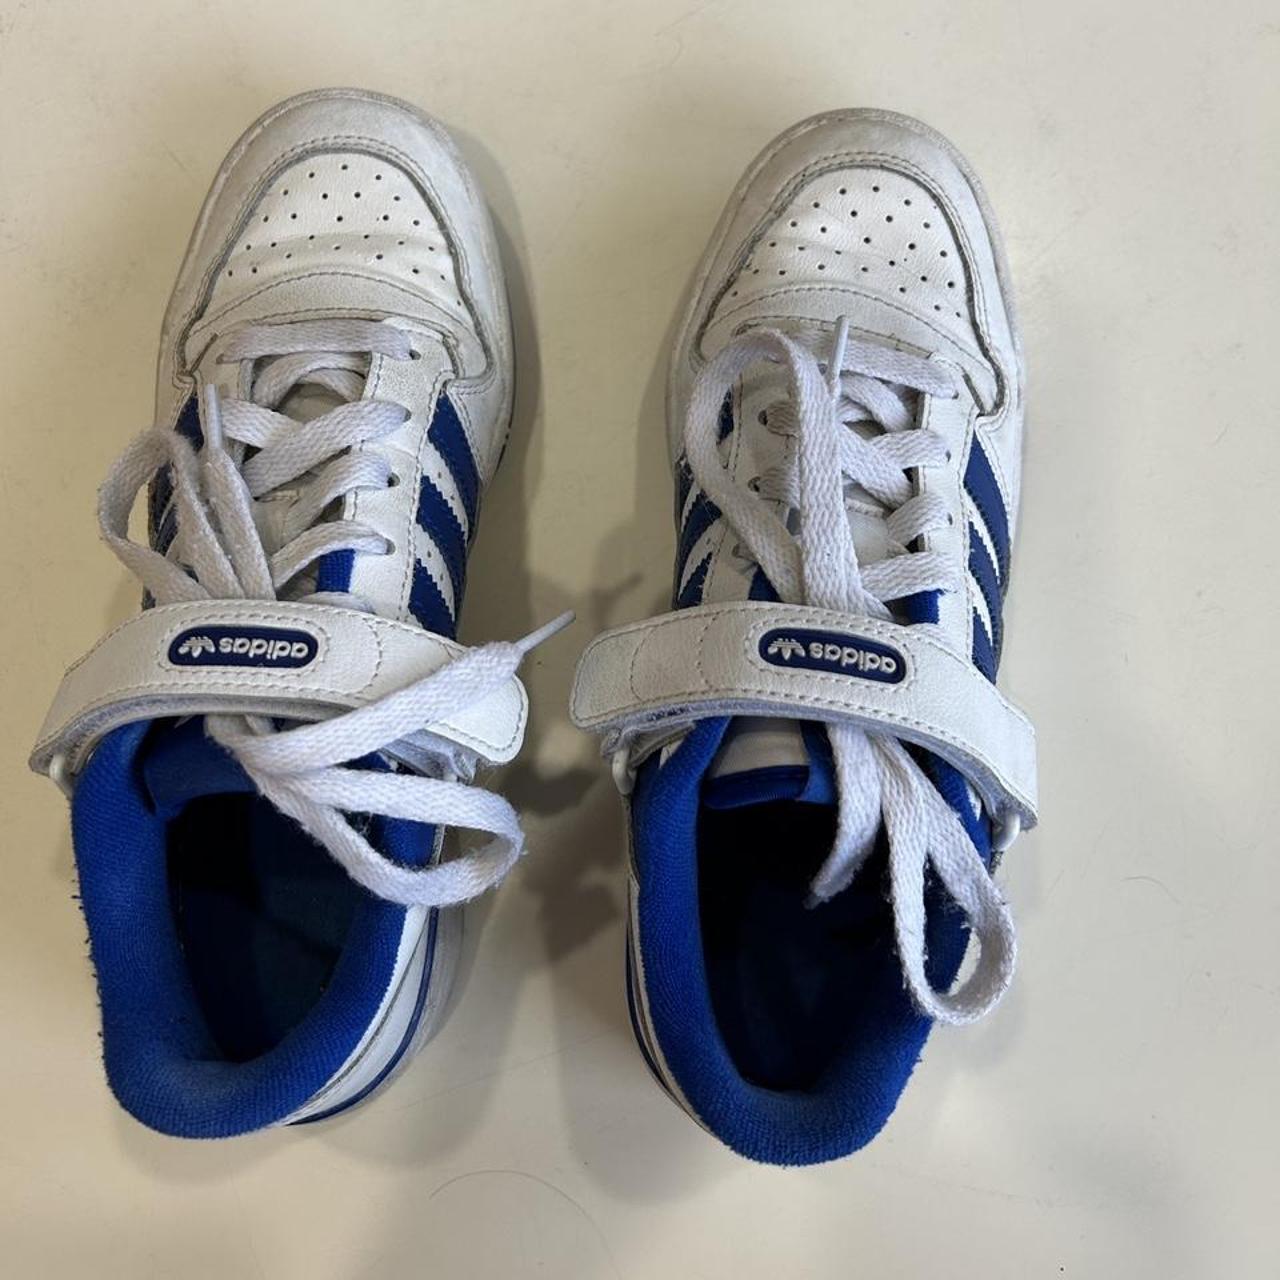 Adidas Women's Blue and White Trainers (2)